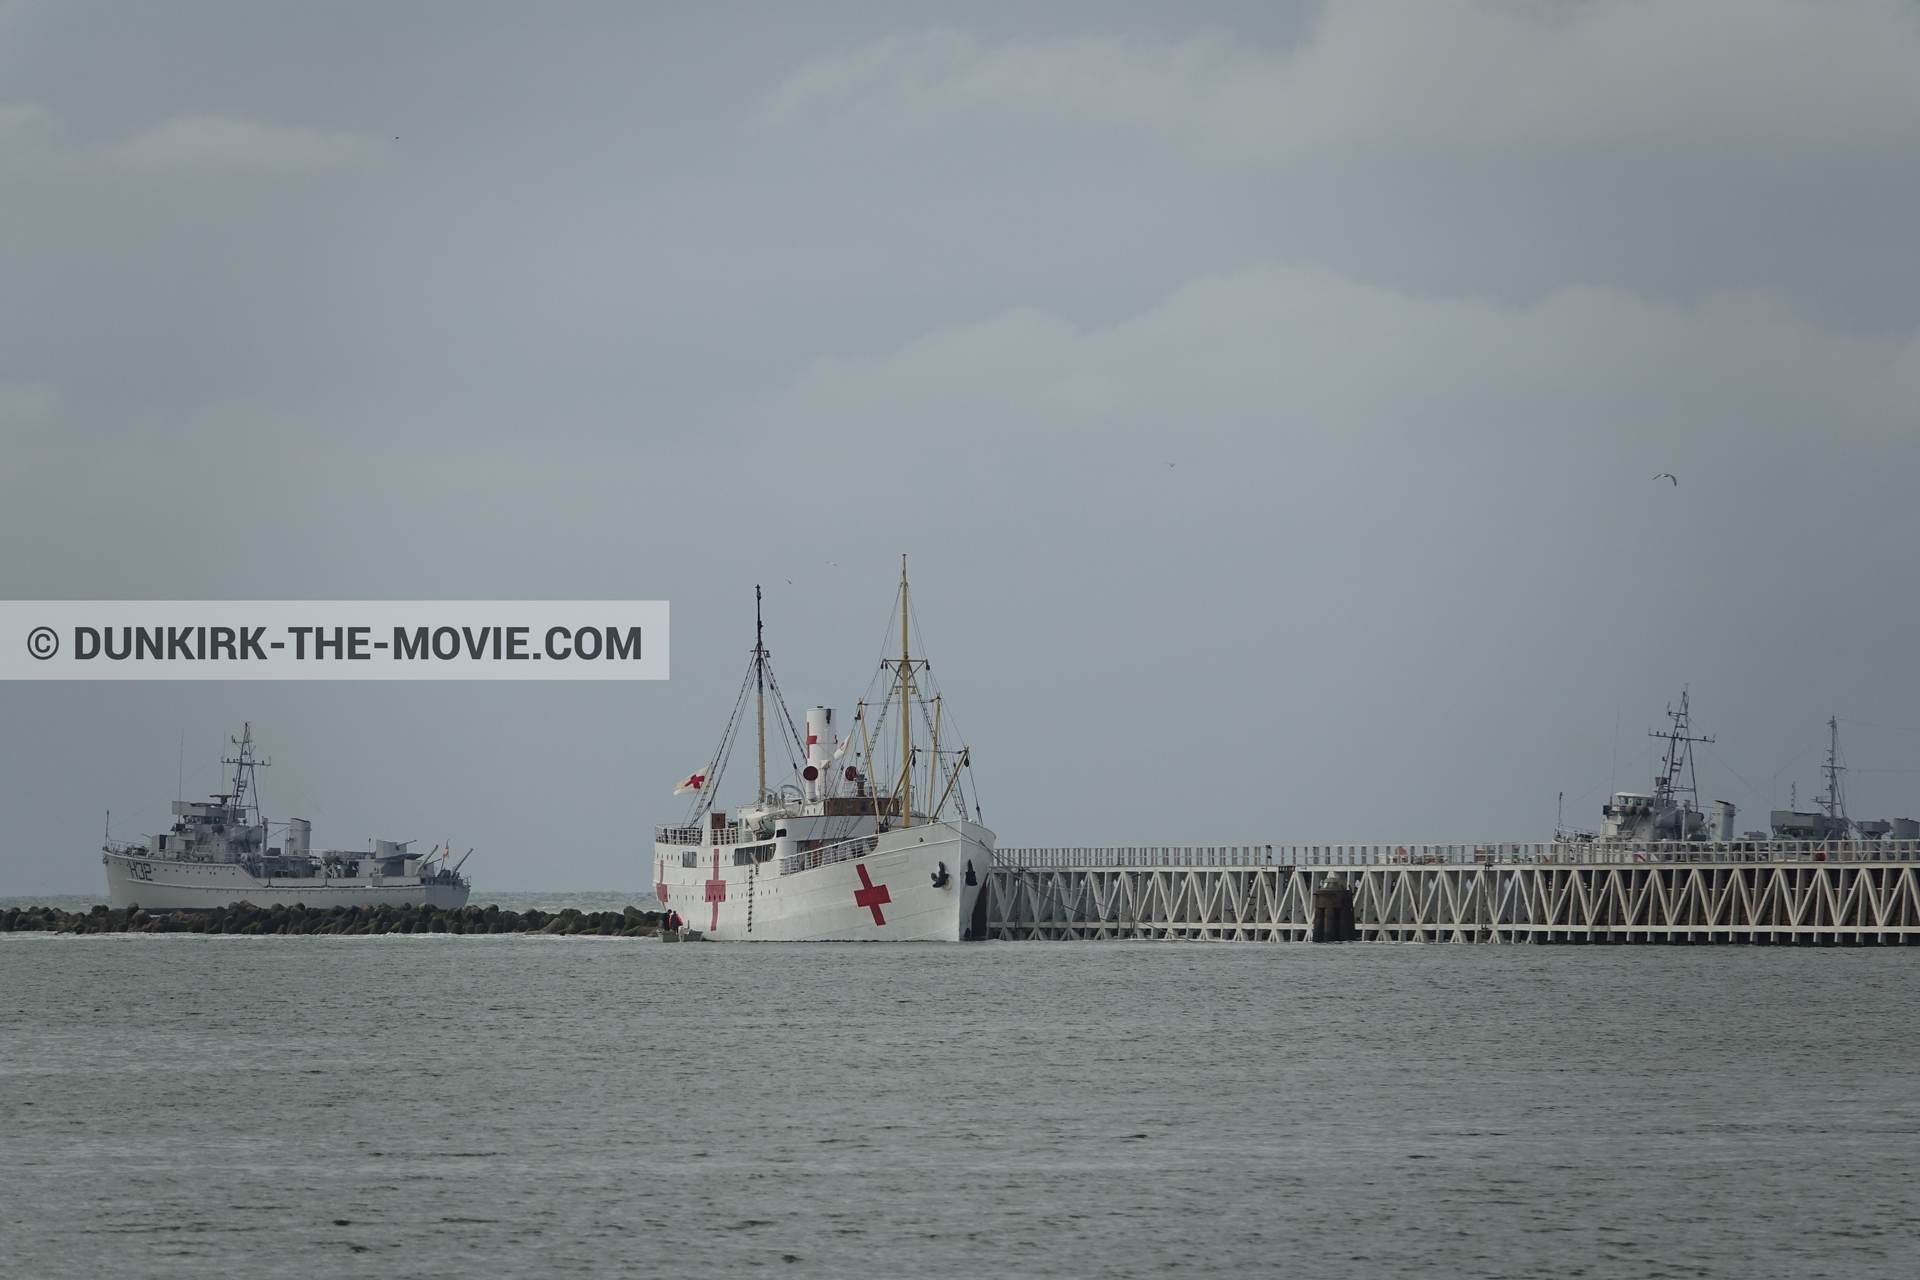 Picture with cloudy sky, H32 - Hr.Ms. Sittard, EST pier, M/S Rogaland,  from behind the scene of the Dunkirk movie by Nolan